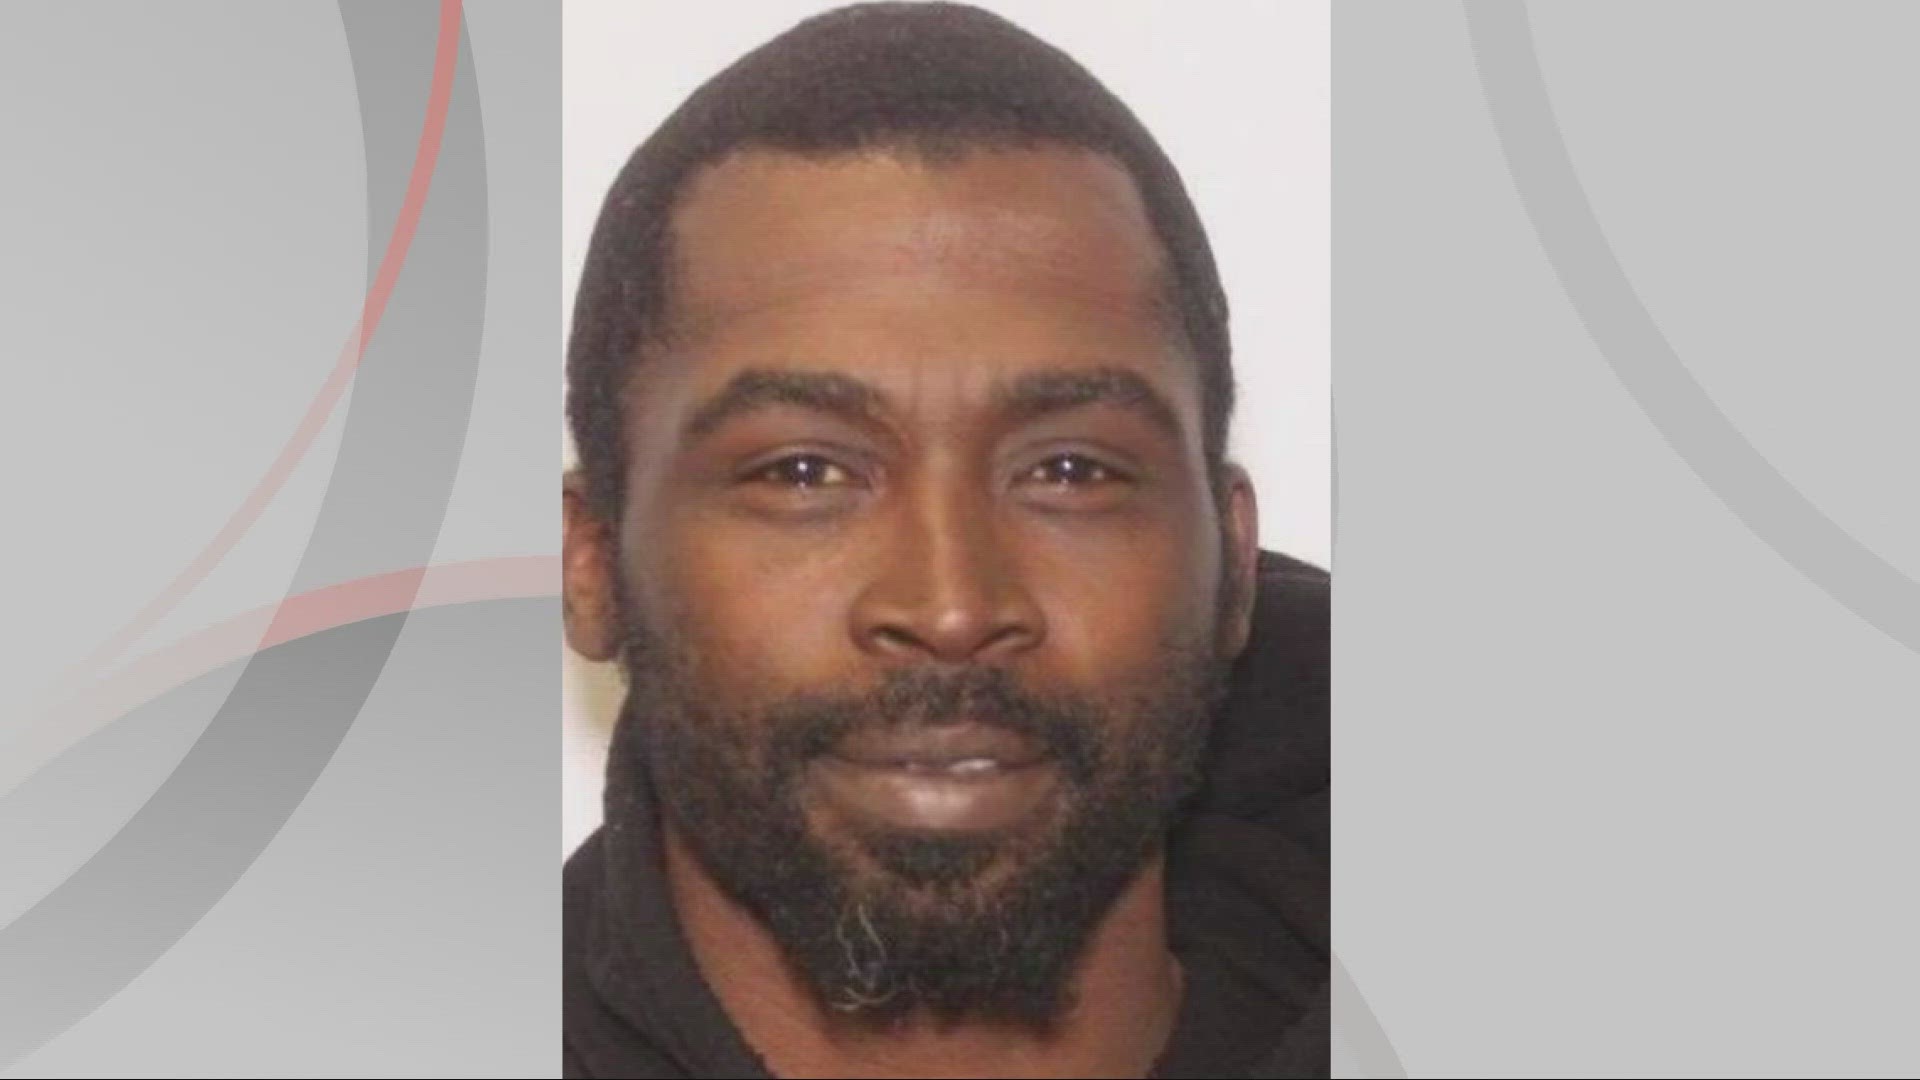 Police are still looking for 38-year-old Keith Allen.